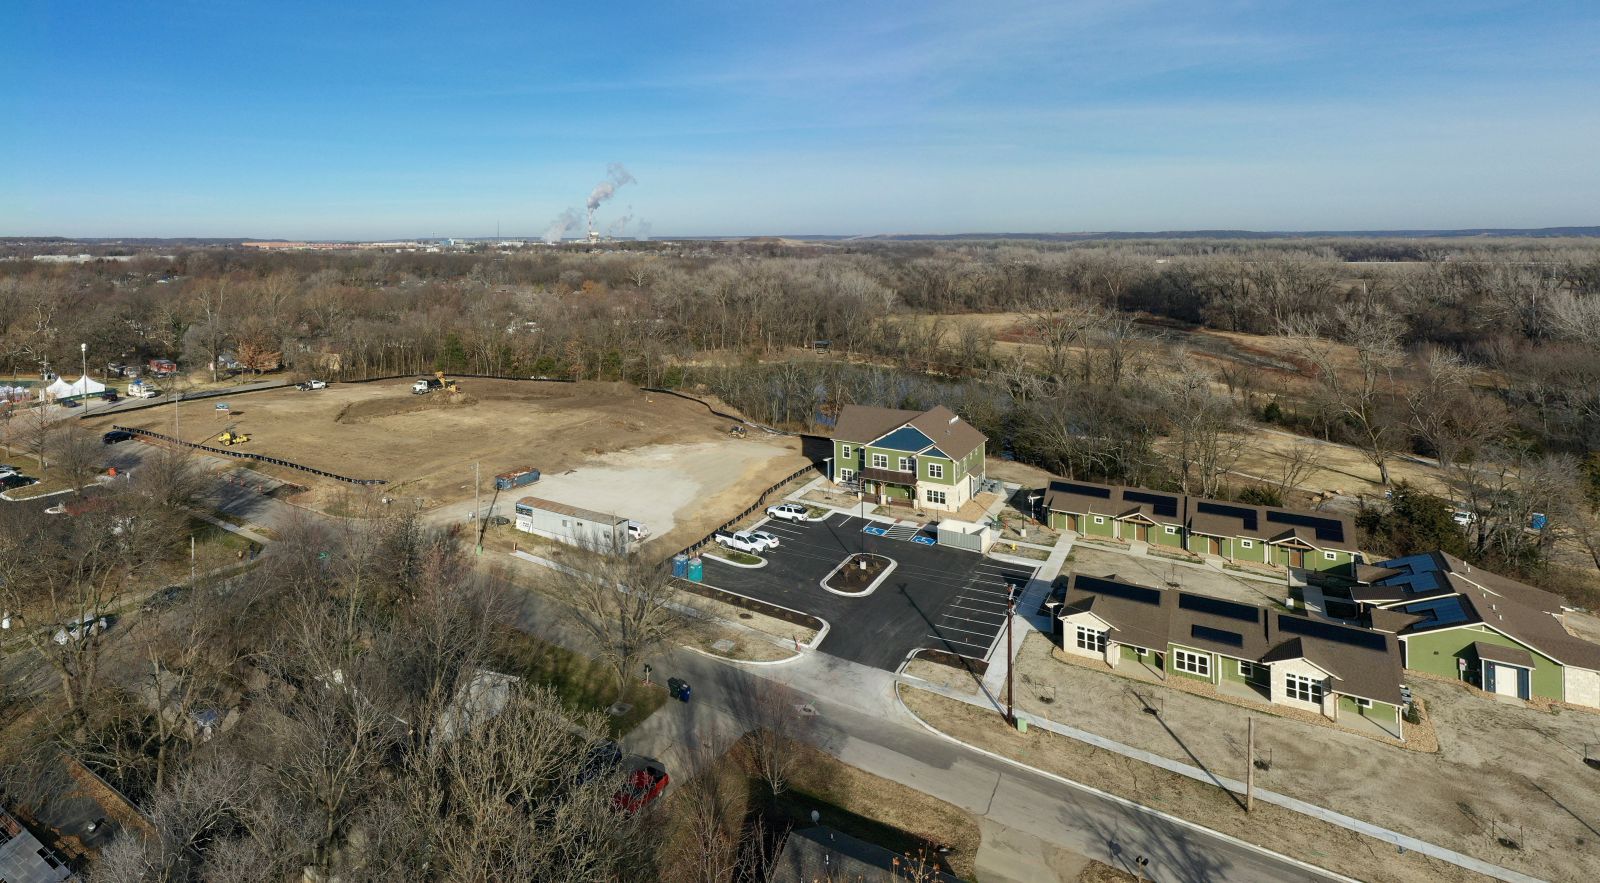 The Treatment and Recovery Campus of Douglas County is pictured in December 2020. Construction on the crisis recovery center began Dec. 7, 2020.